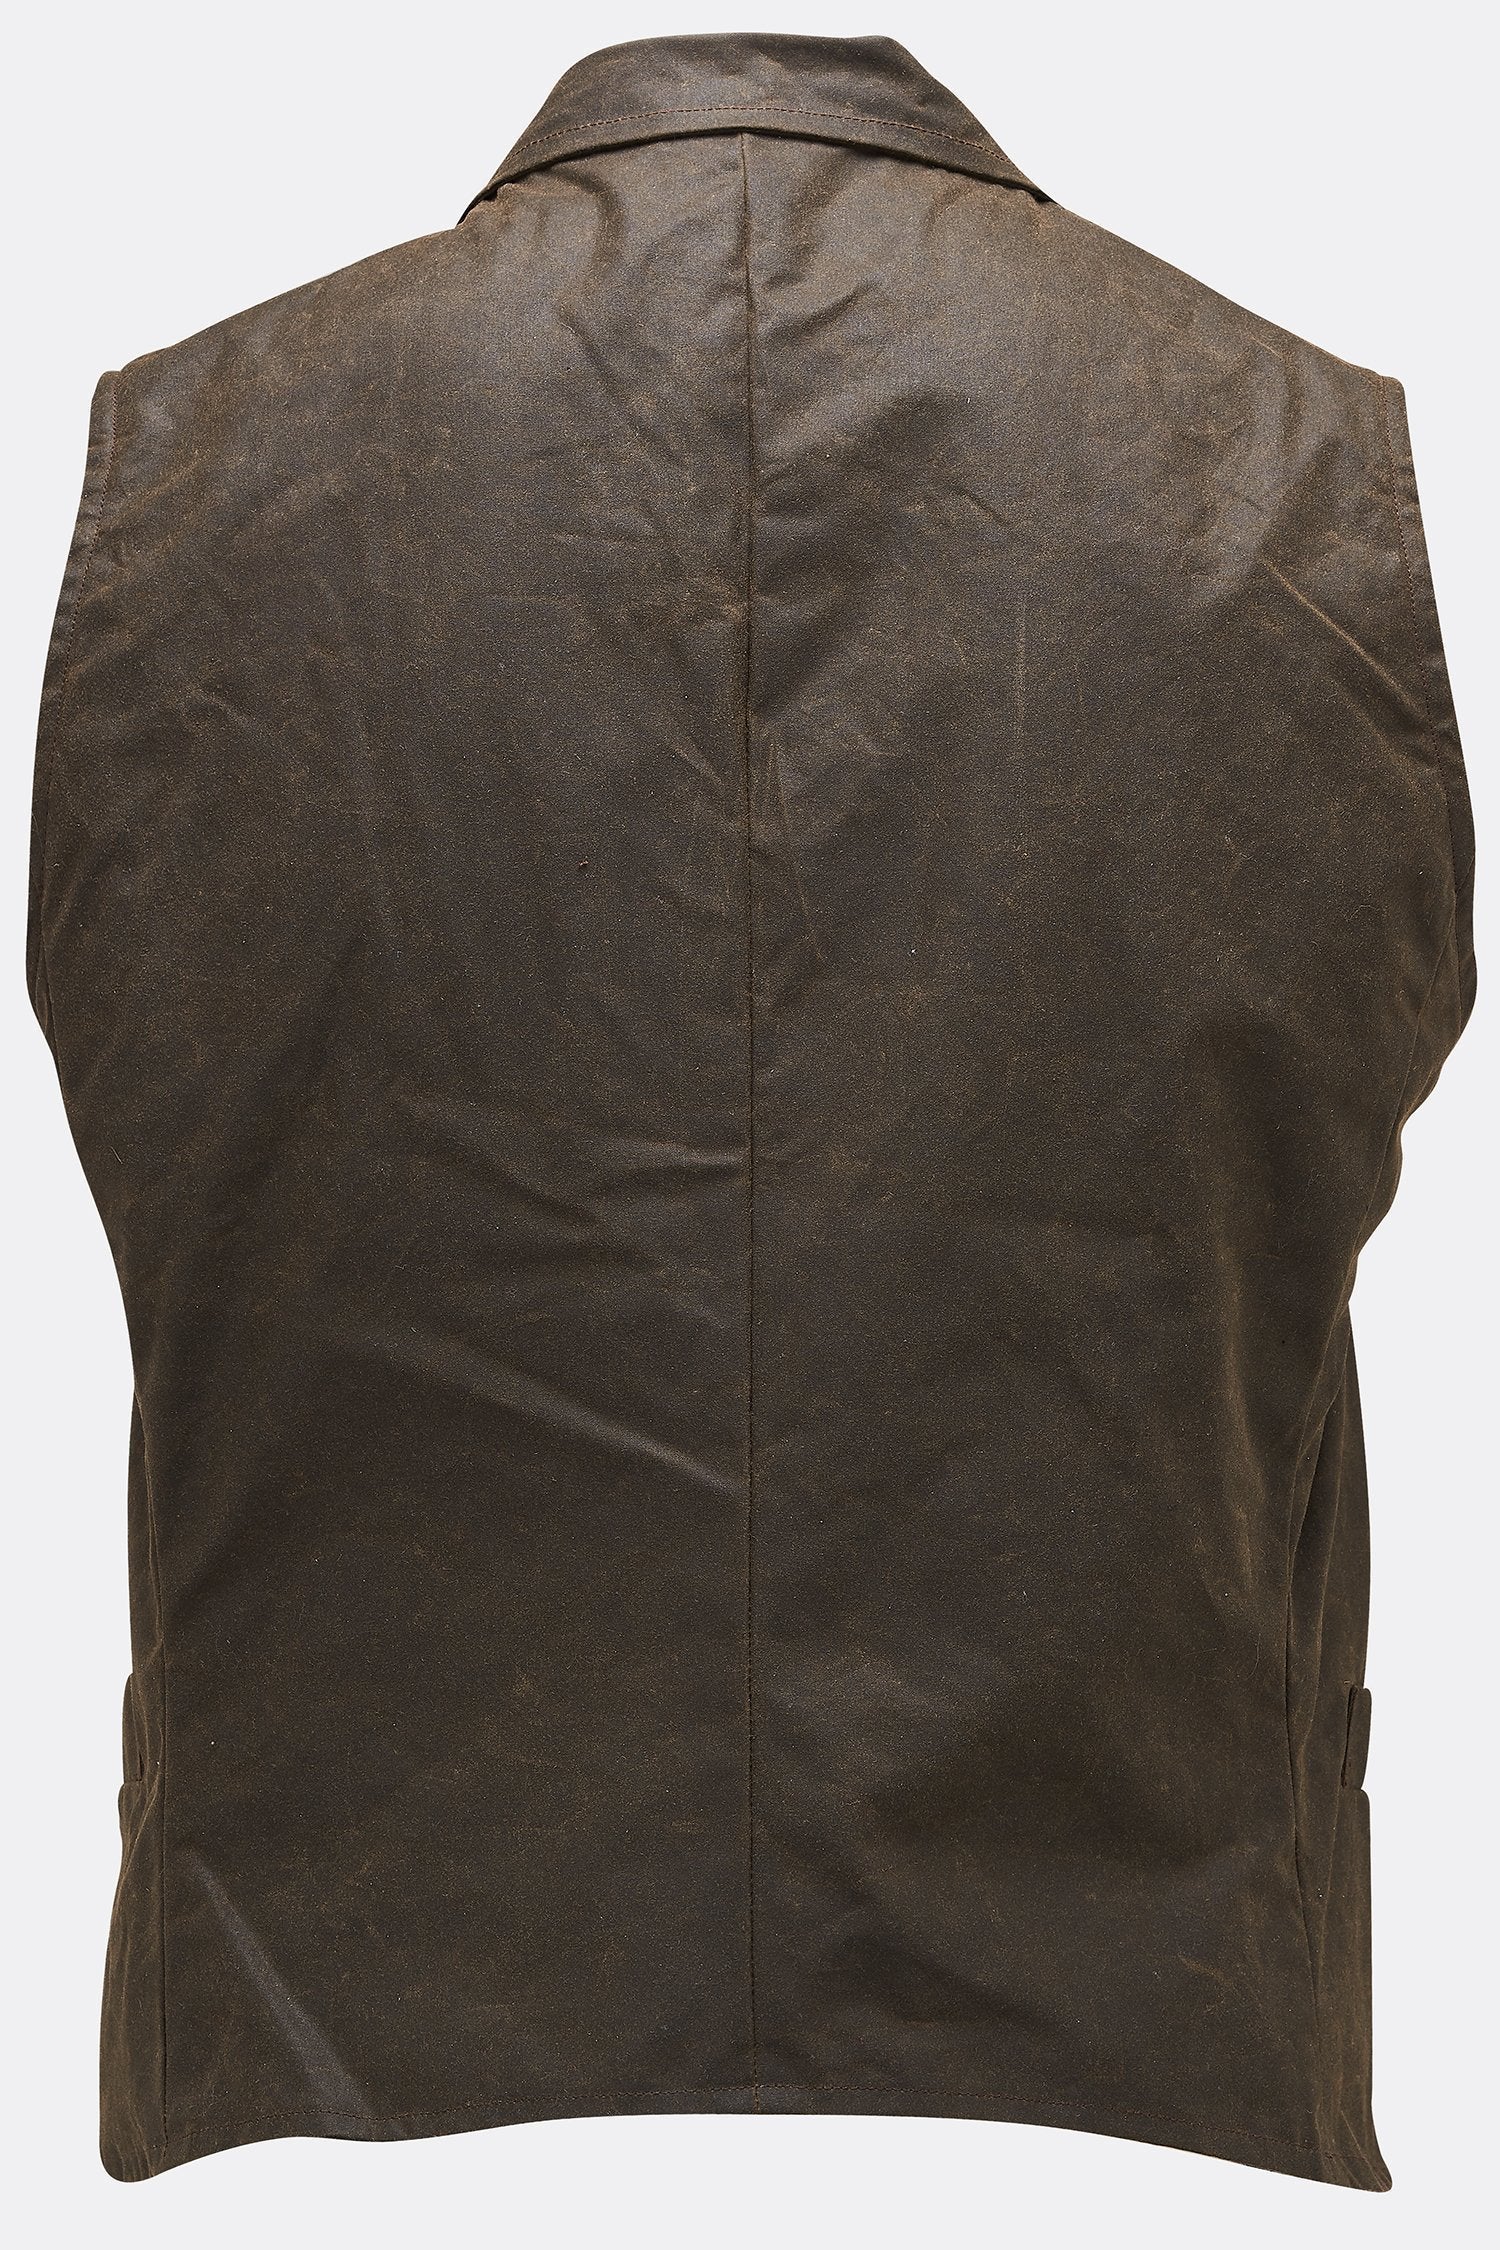 SHEPPARD WAISTCOAT IN OLIVE WAXED COTTON-menswear-A Child Of The Jago